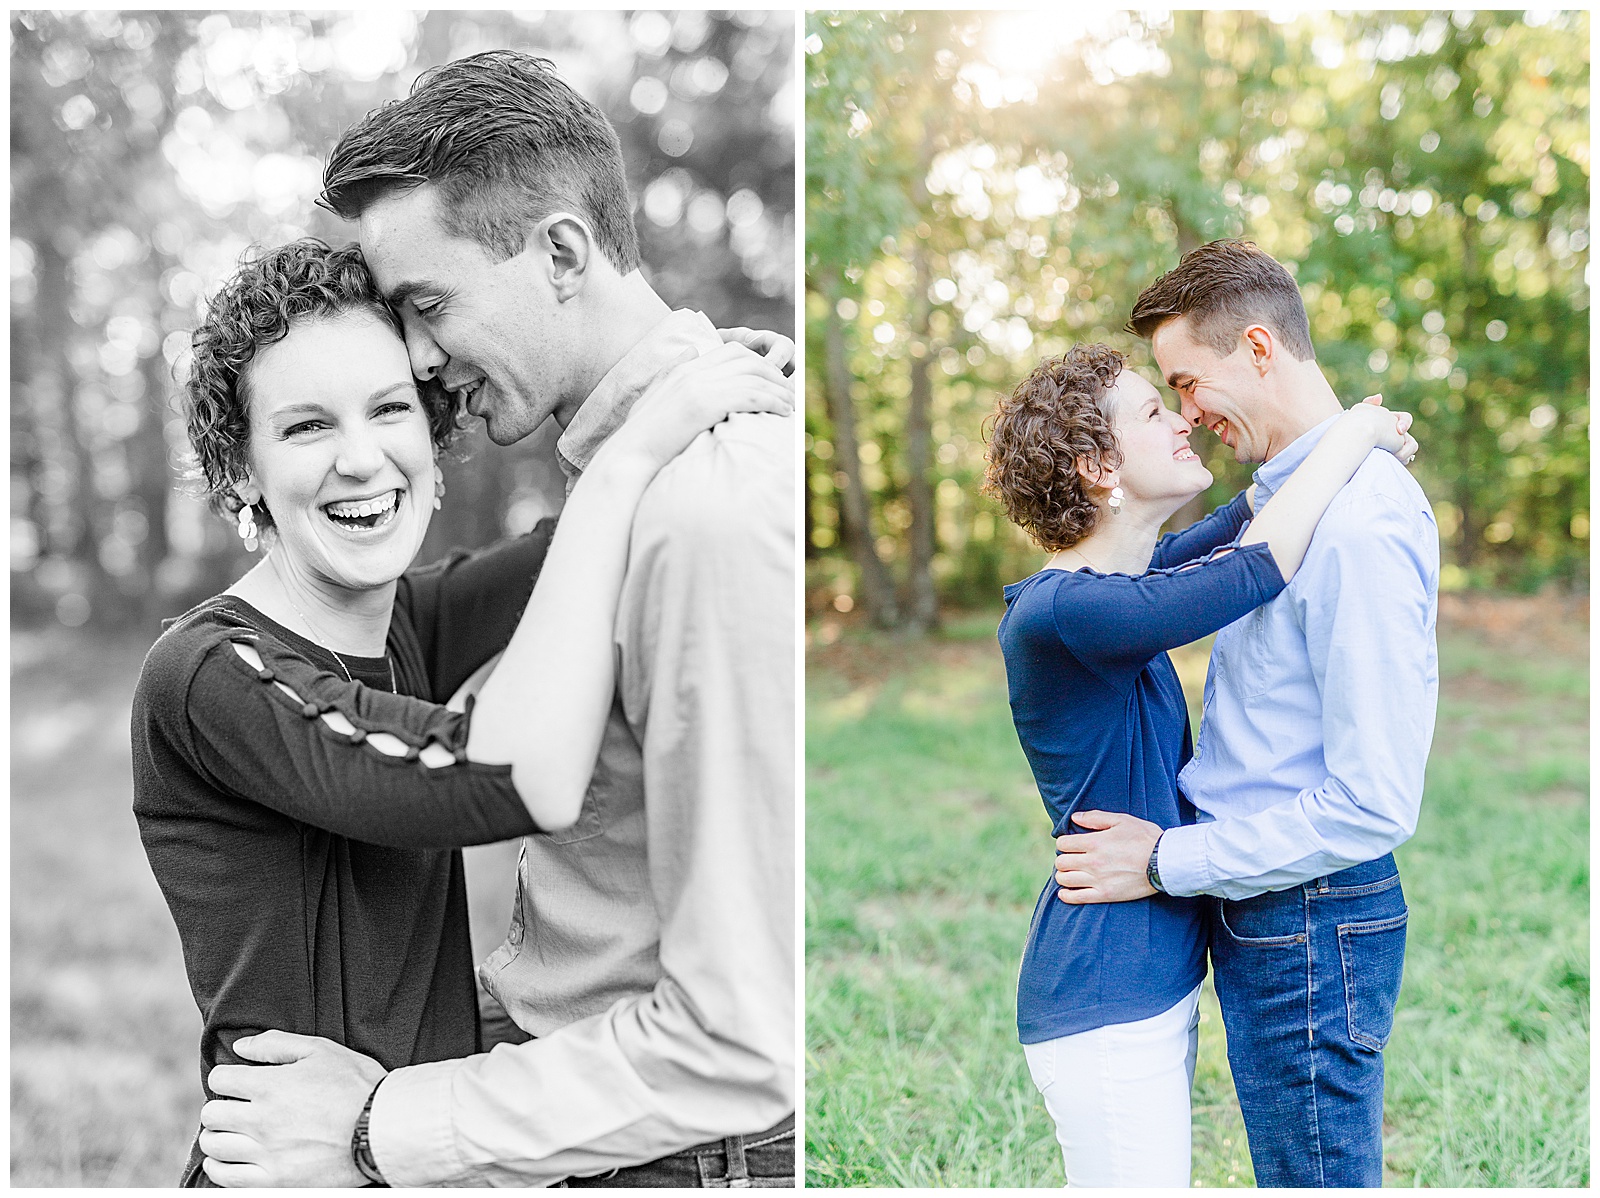 Golden Hour Outdoor Engagement Session with Classy Blue Shirt White Jeans Outfit Ideas in Charlotte, NC by Kevyn Dixon Photography